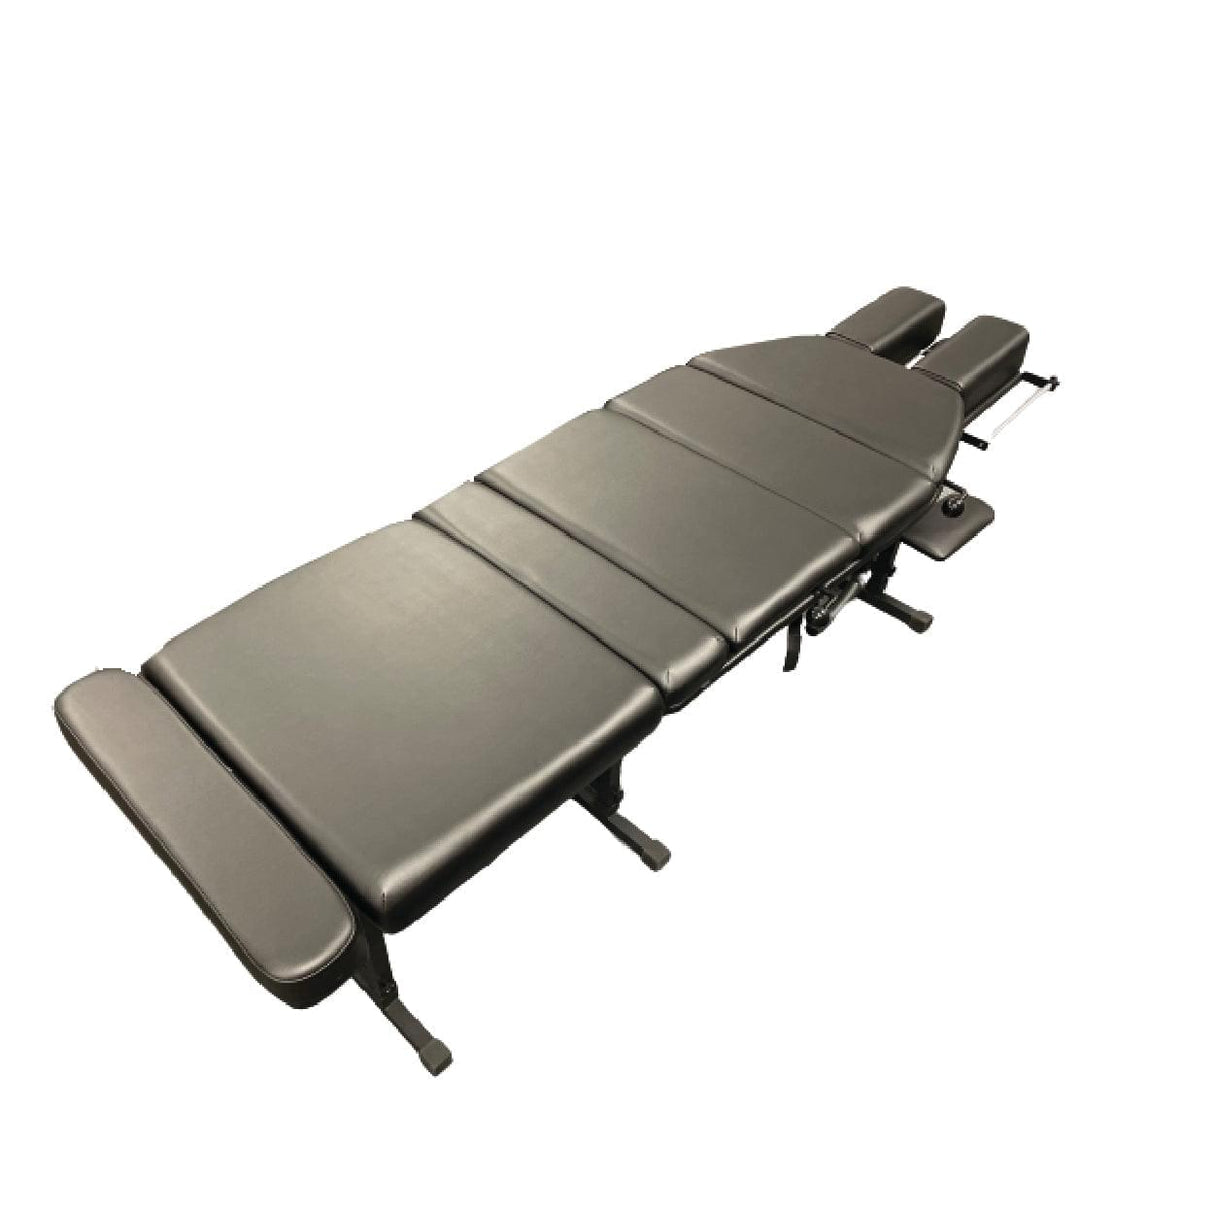 180 Series Portable Chiropractic Table